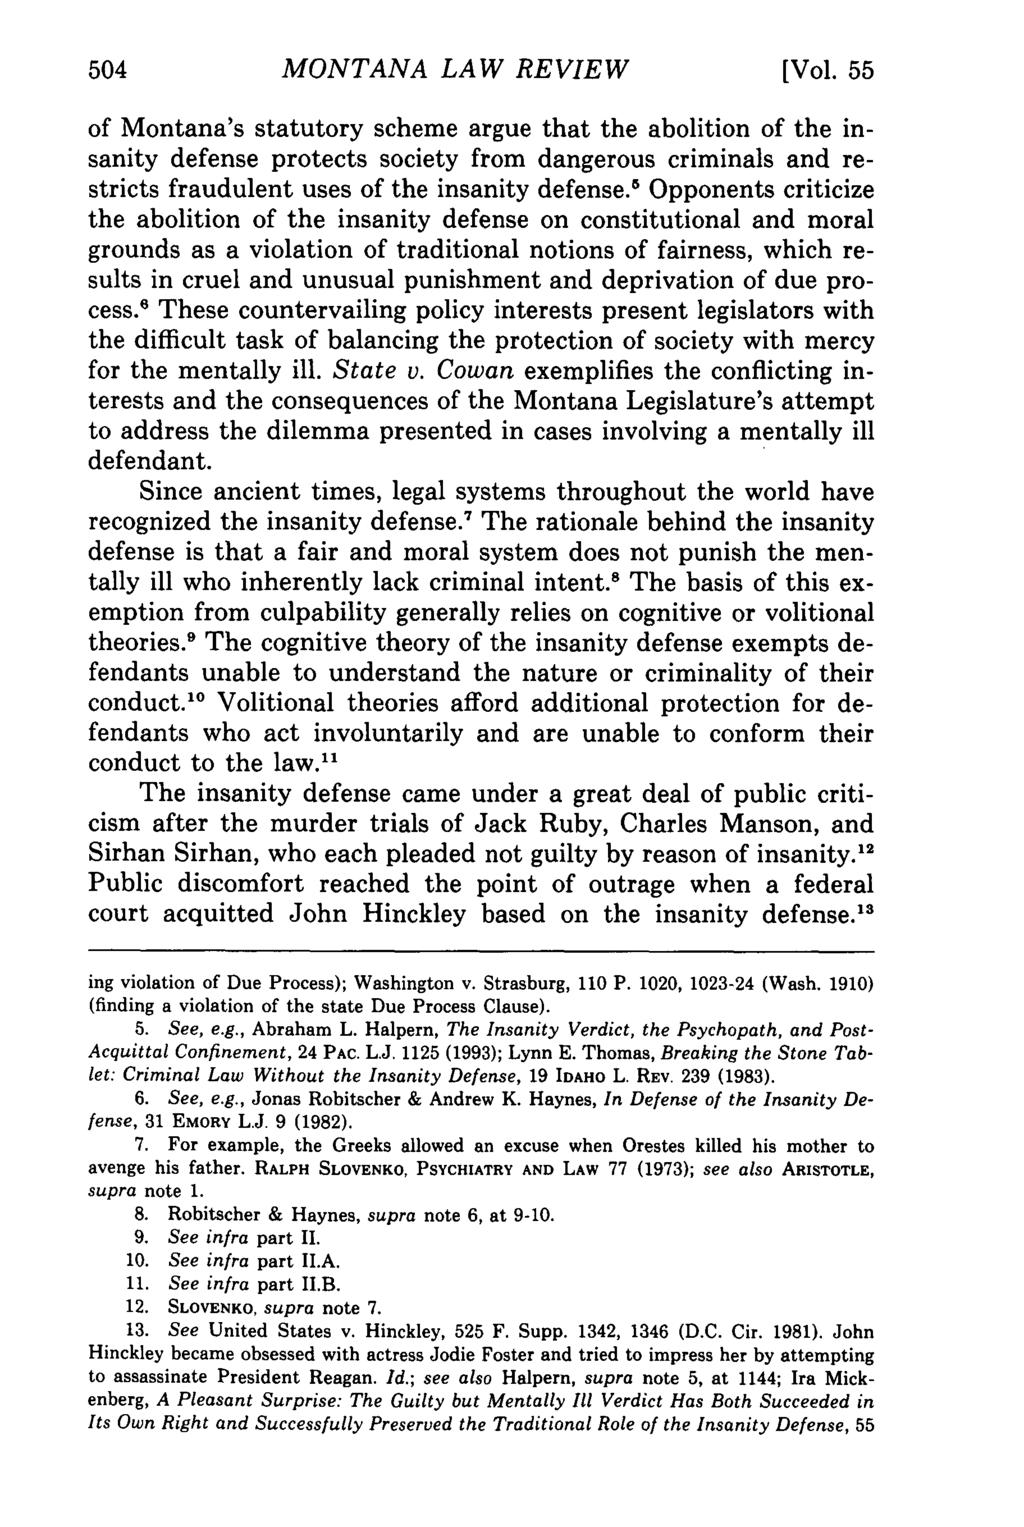 Montana MONTANA Law Review, LAW Vol. REVIEW 55 [1994], Iss. 2, Art. 12 [Vol.